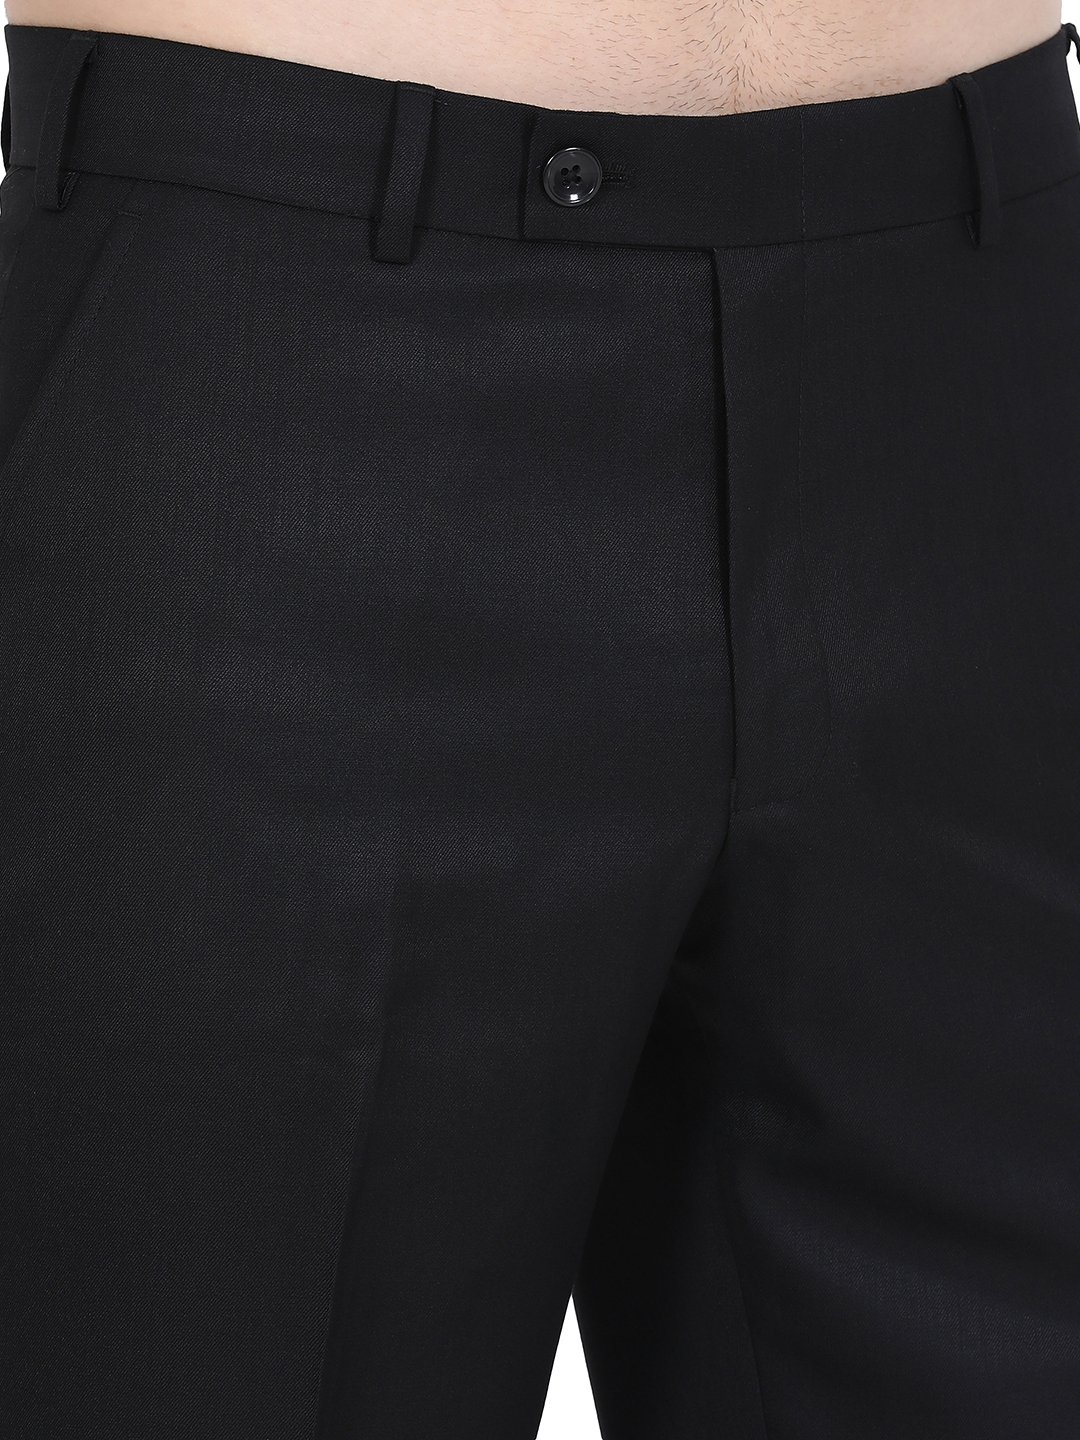 Greenfibre | Black Solid Classic fit Formal Trouser | Greenfibre 4